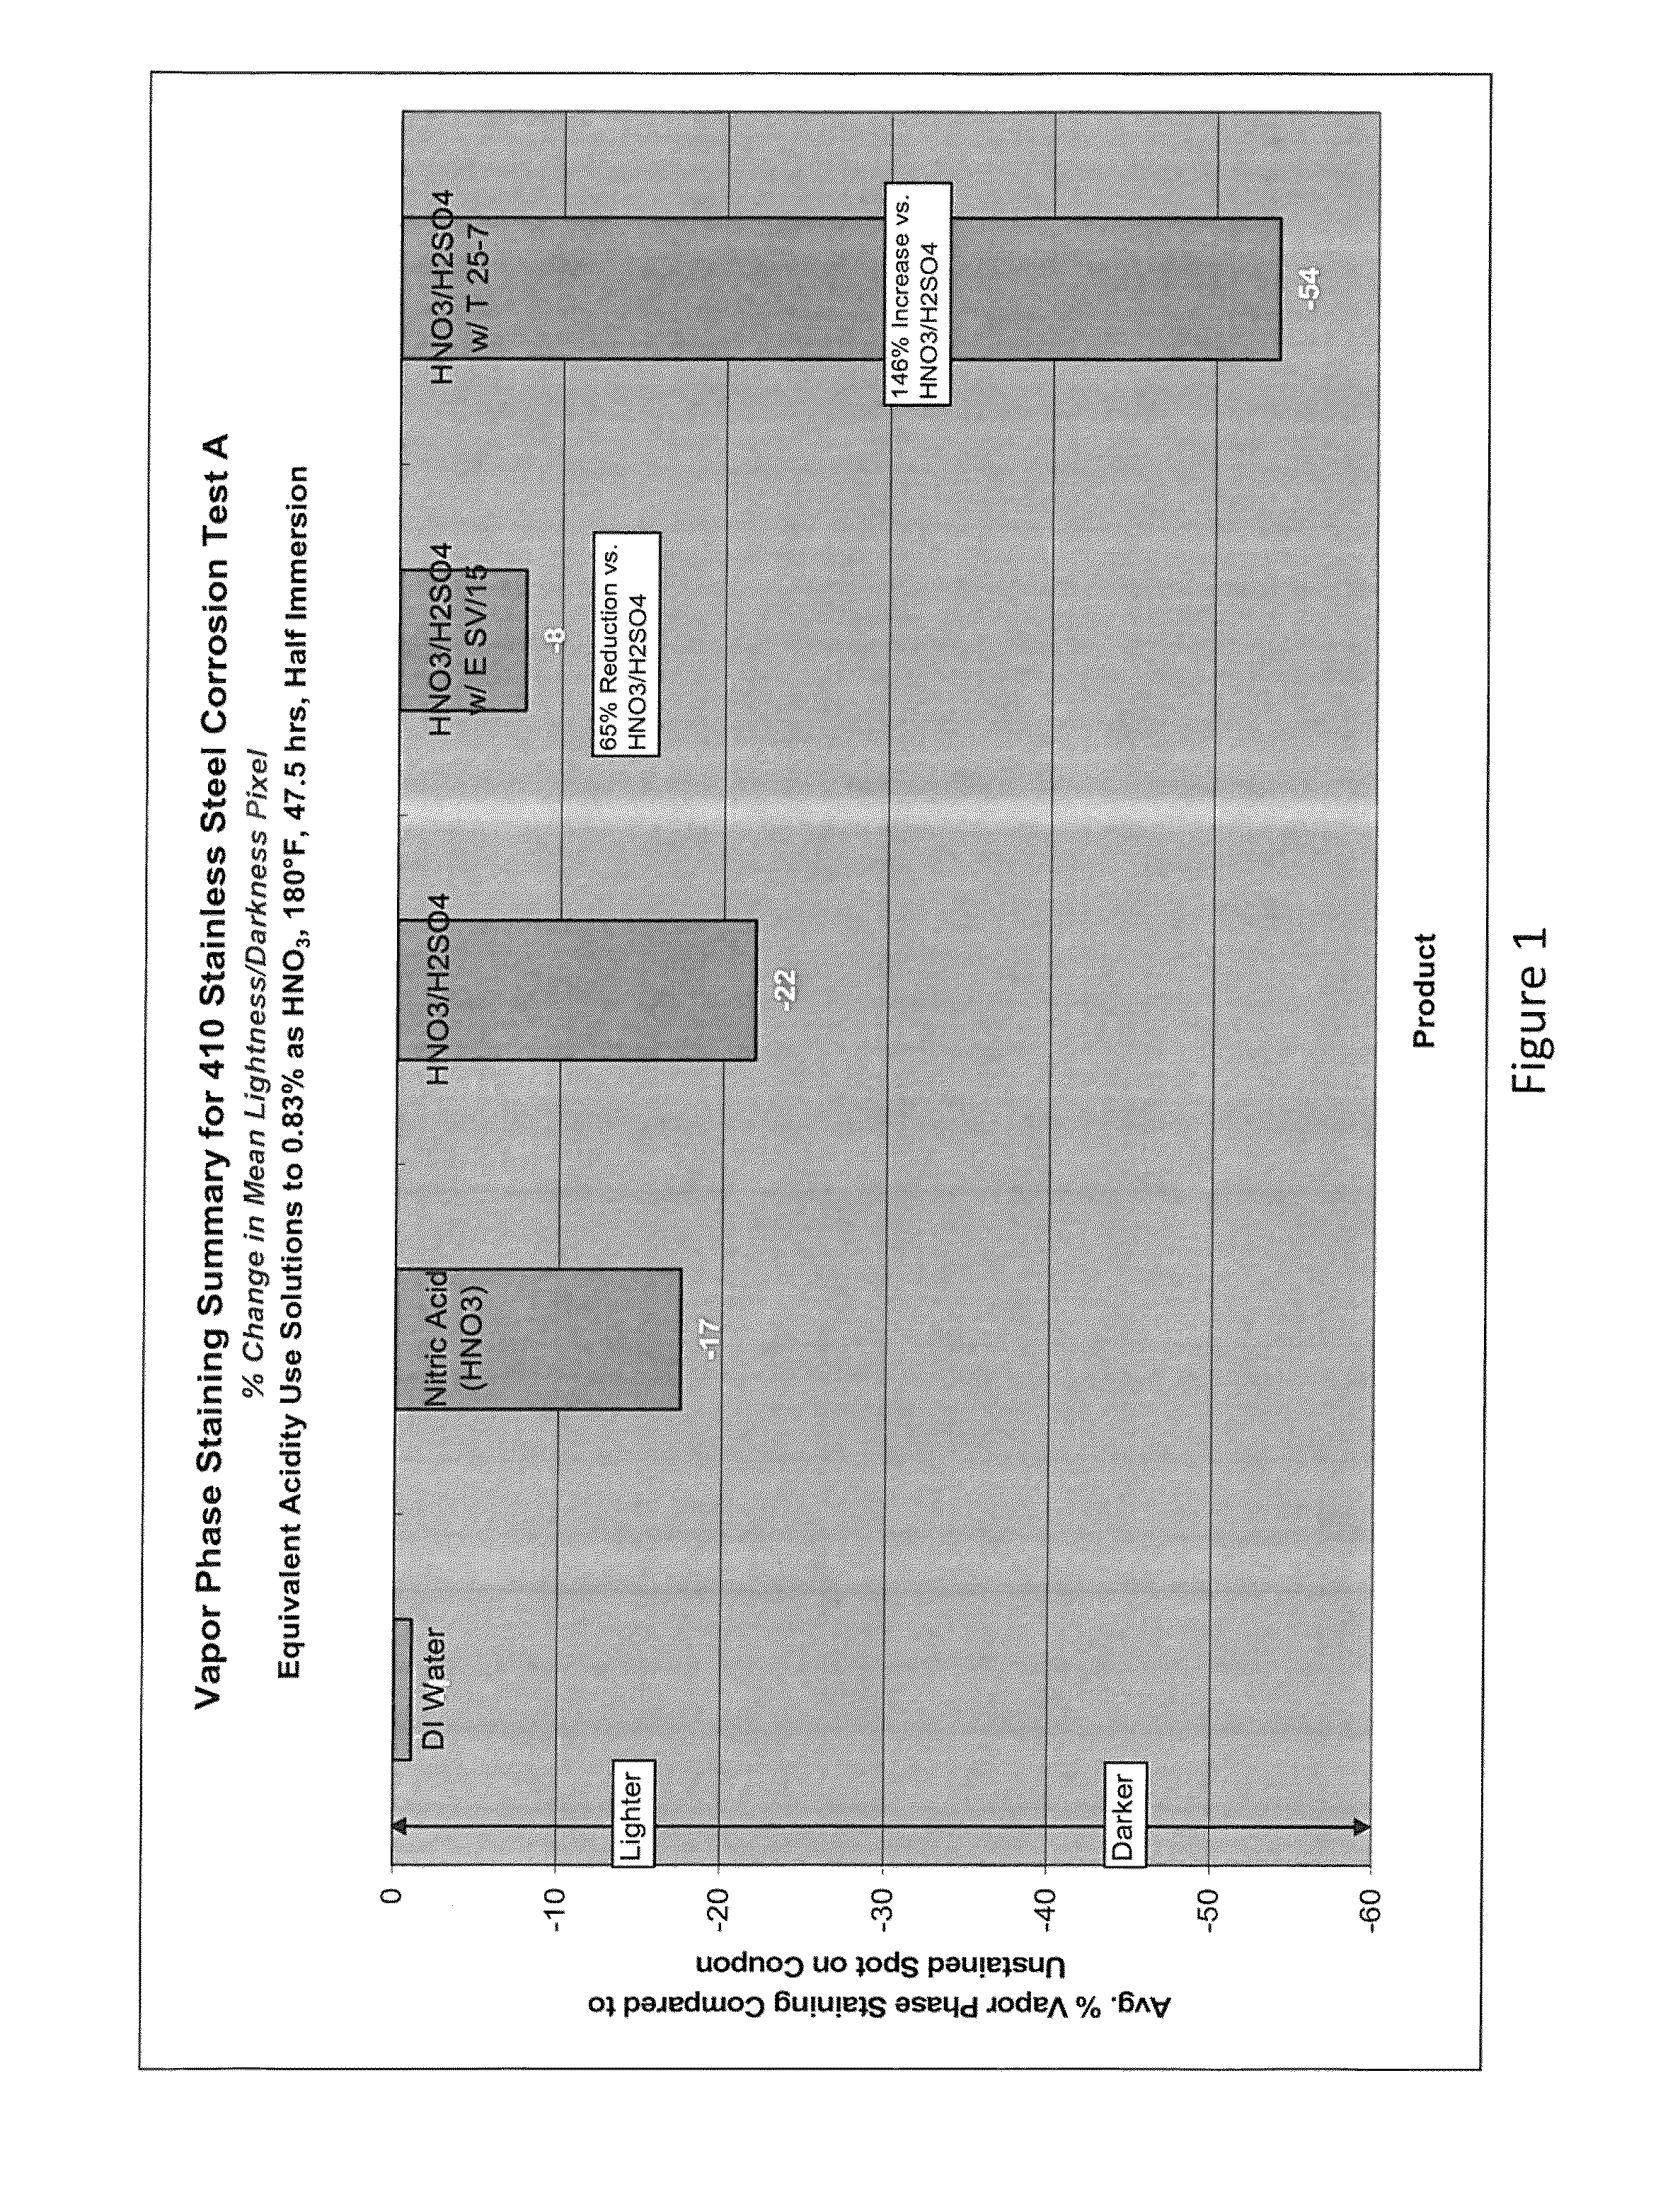 Aqueous acid cleaning, corrosion and stain inhibiting compositions in the vapor phase comprising a blend of nitric and sulfuric acid